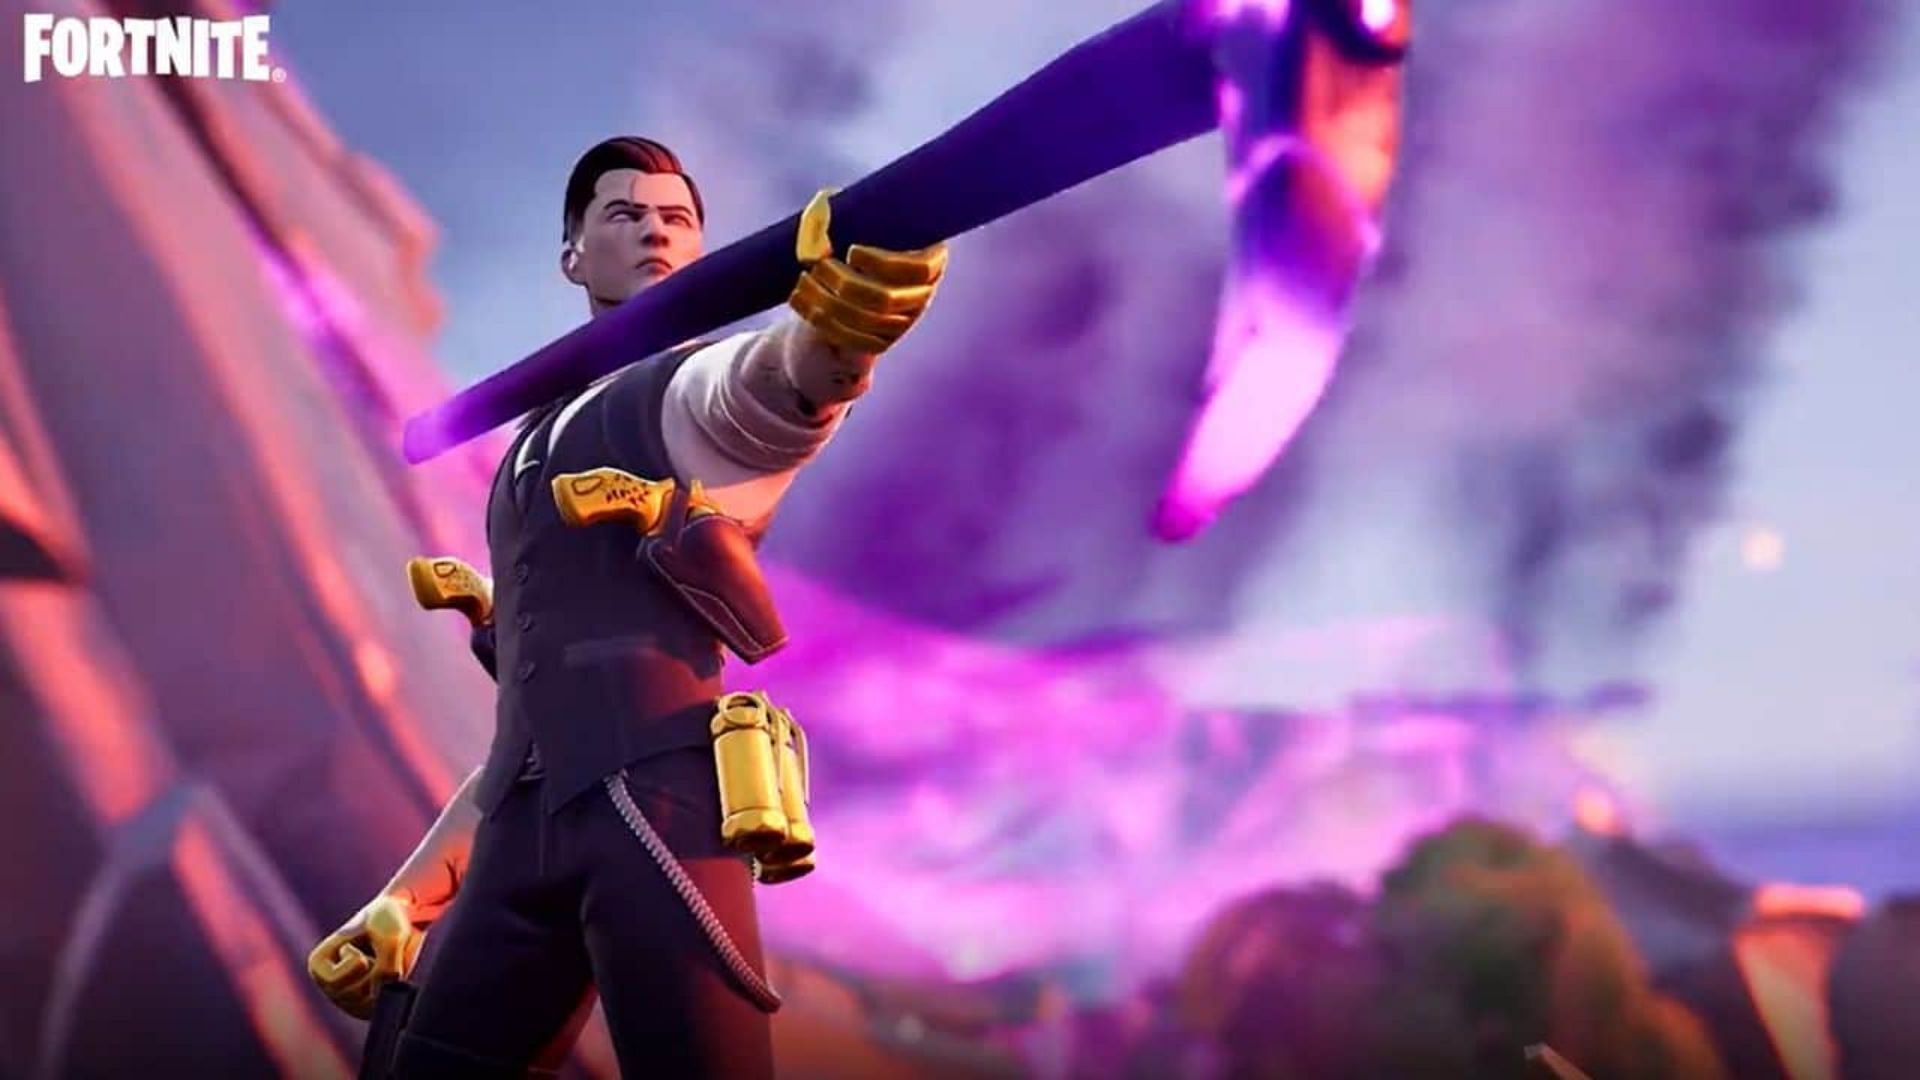 Why was Midas removed from Fortnite? (Image via Epic Games)